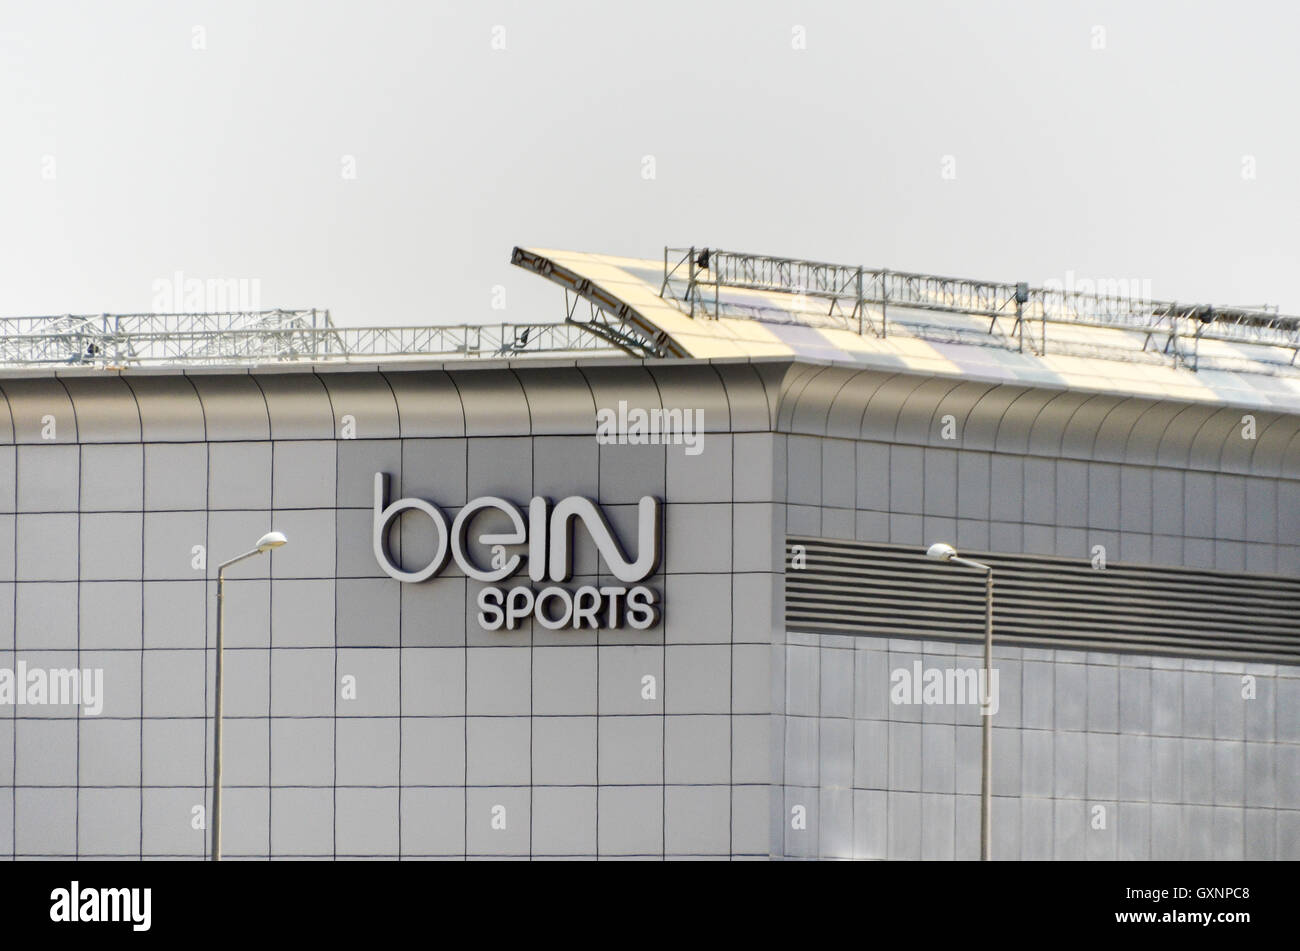 Headquarters of beIN sports sport channel in Doha, Qatar Stock Photo